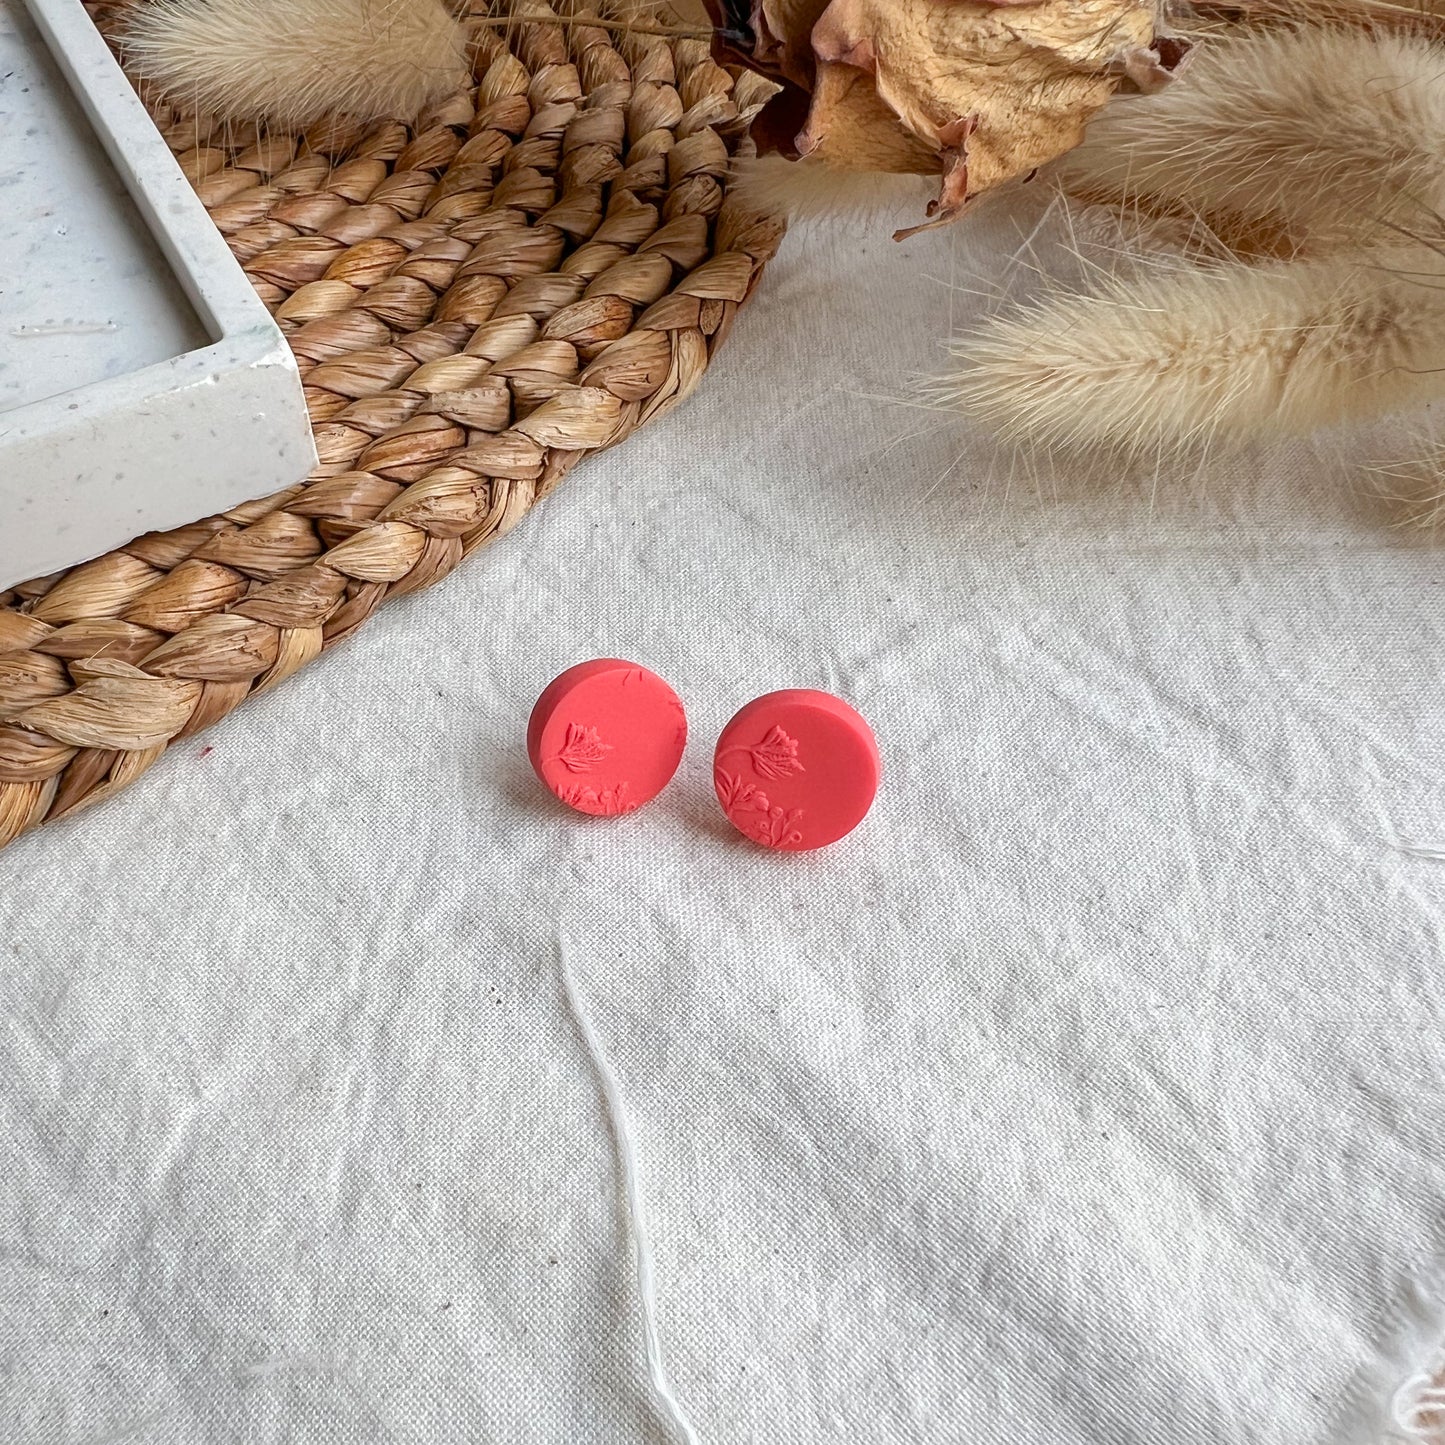 ROUND | Medium round blossom textured stud earrings in bright coral red